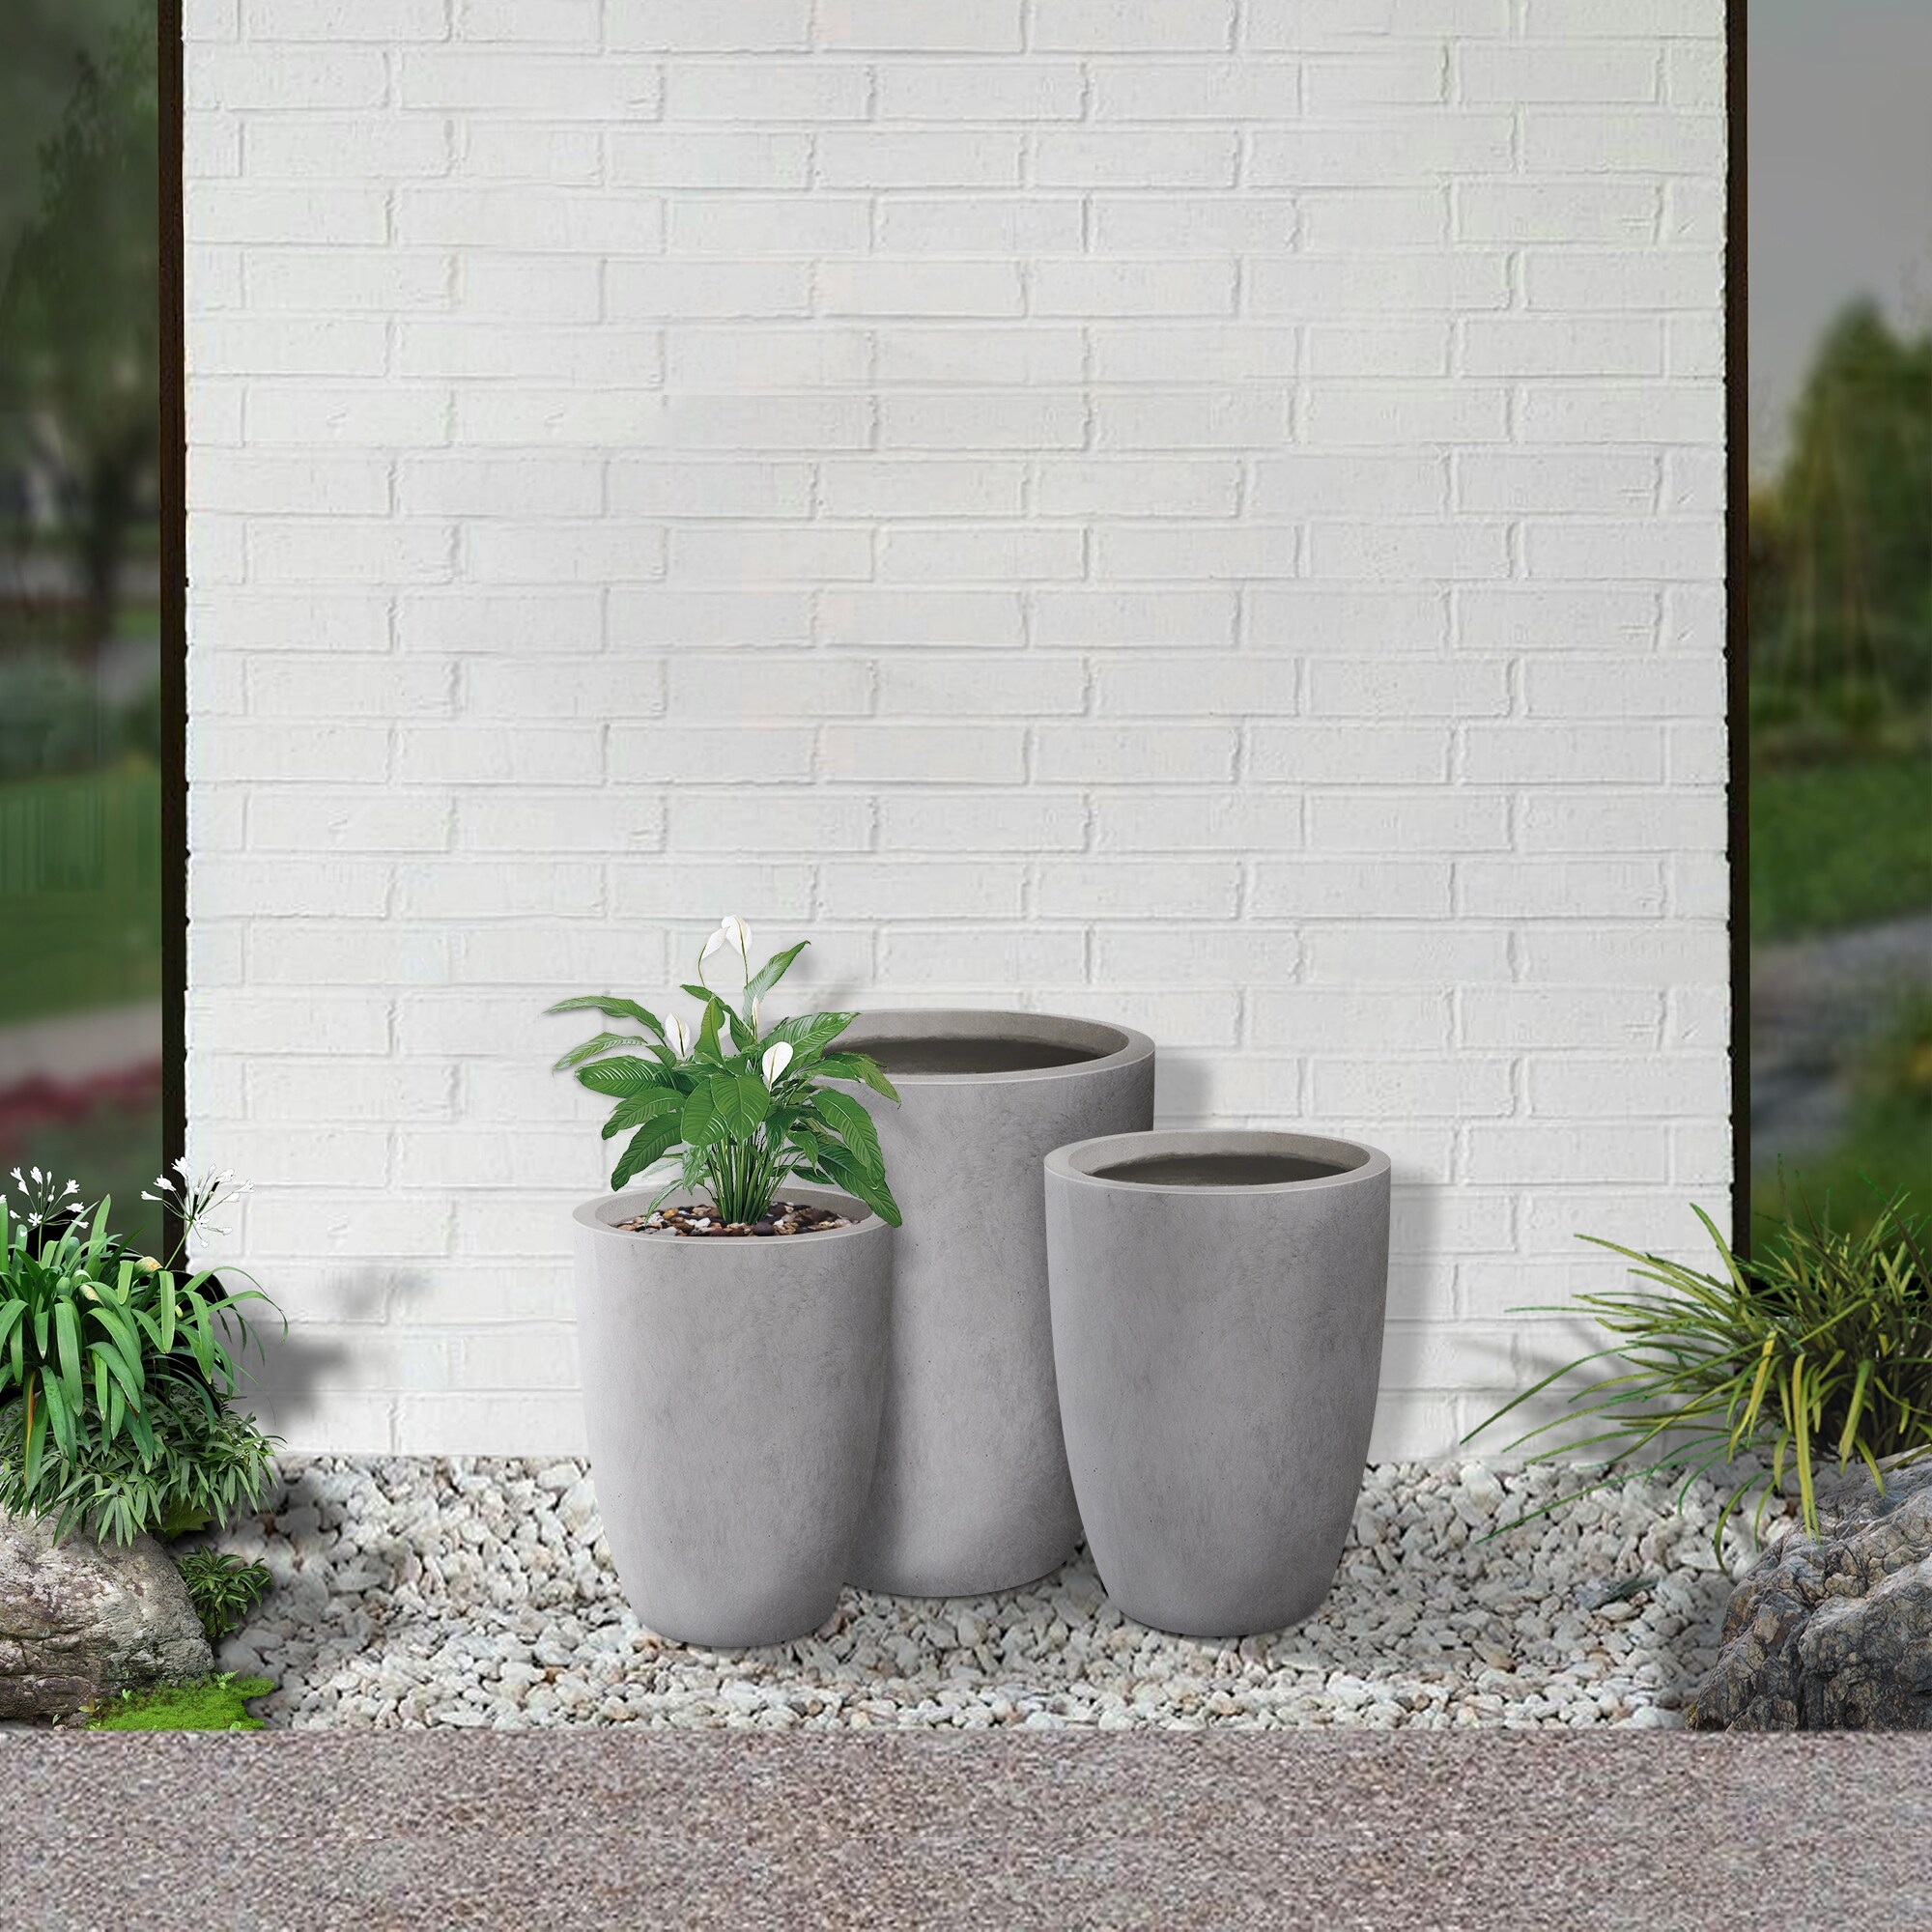 Kante 3 Piece 22.4, 20.4 and 18.1H Round Charcoal Finish Concrete Modern Tall Planters, Outdoor Indoor Decorative Plant Pots with Drainage Hole and